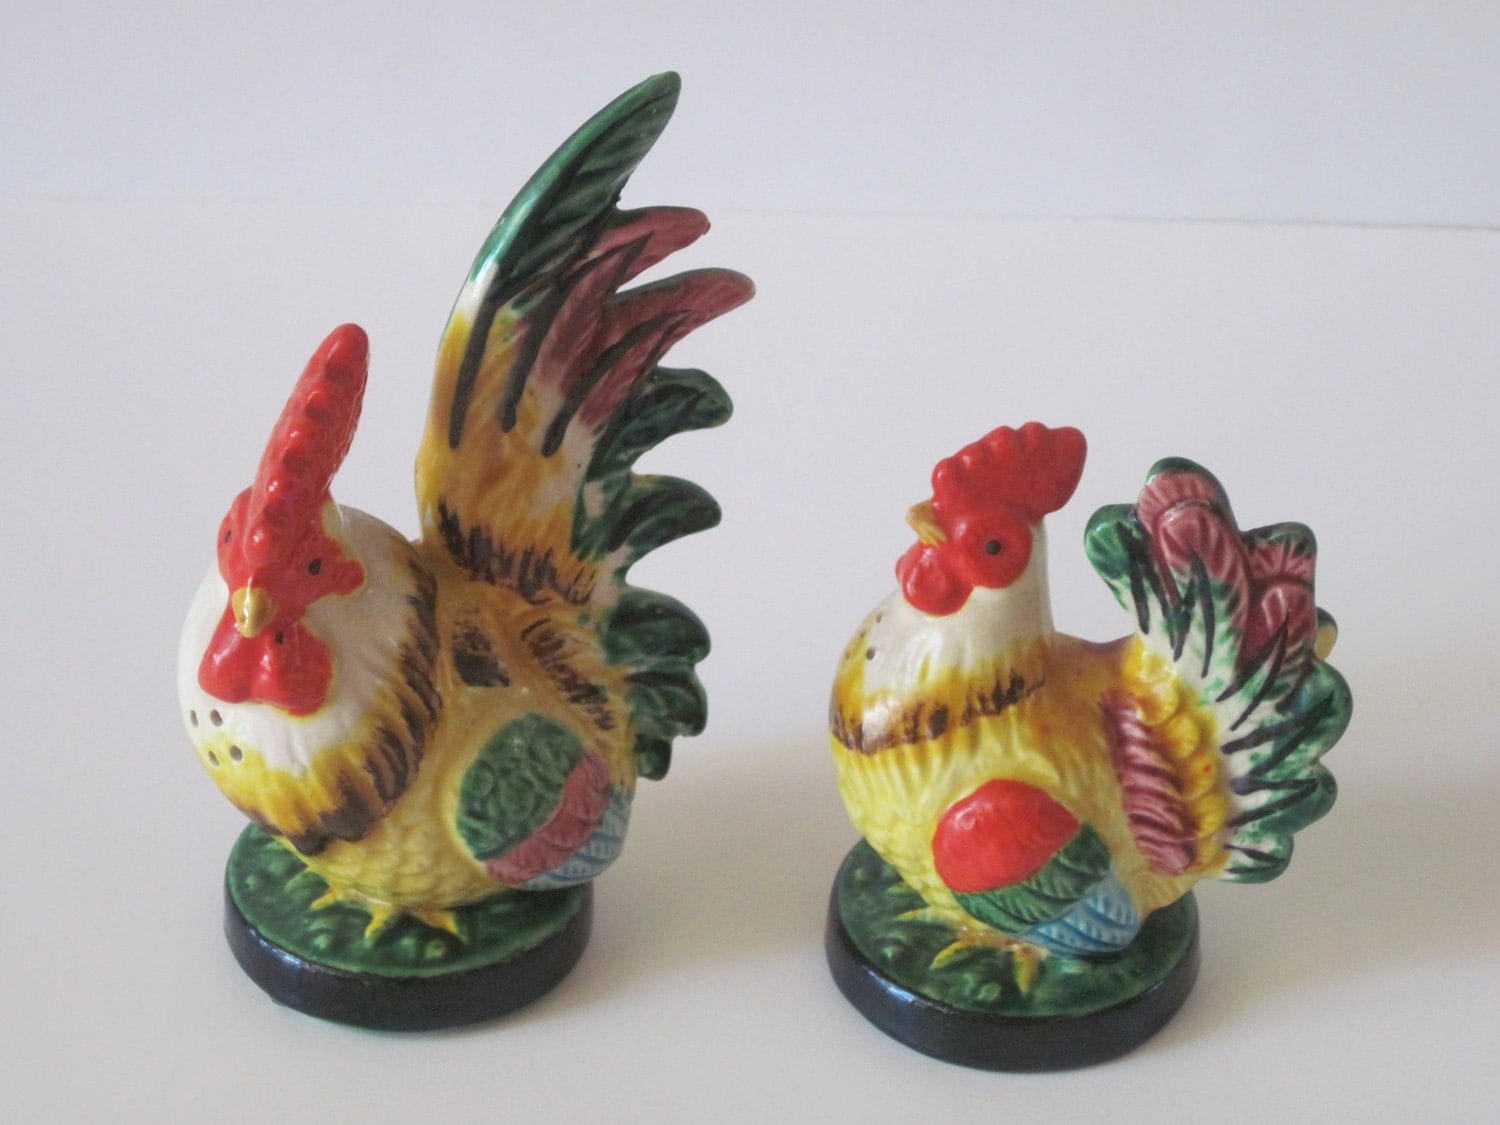 Vintage Rooster Salt and Pepper Shakers Japan by Relic189 on Etsy